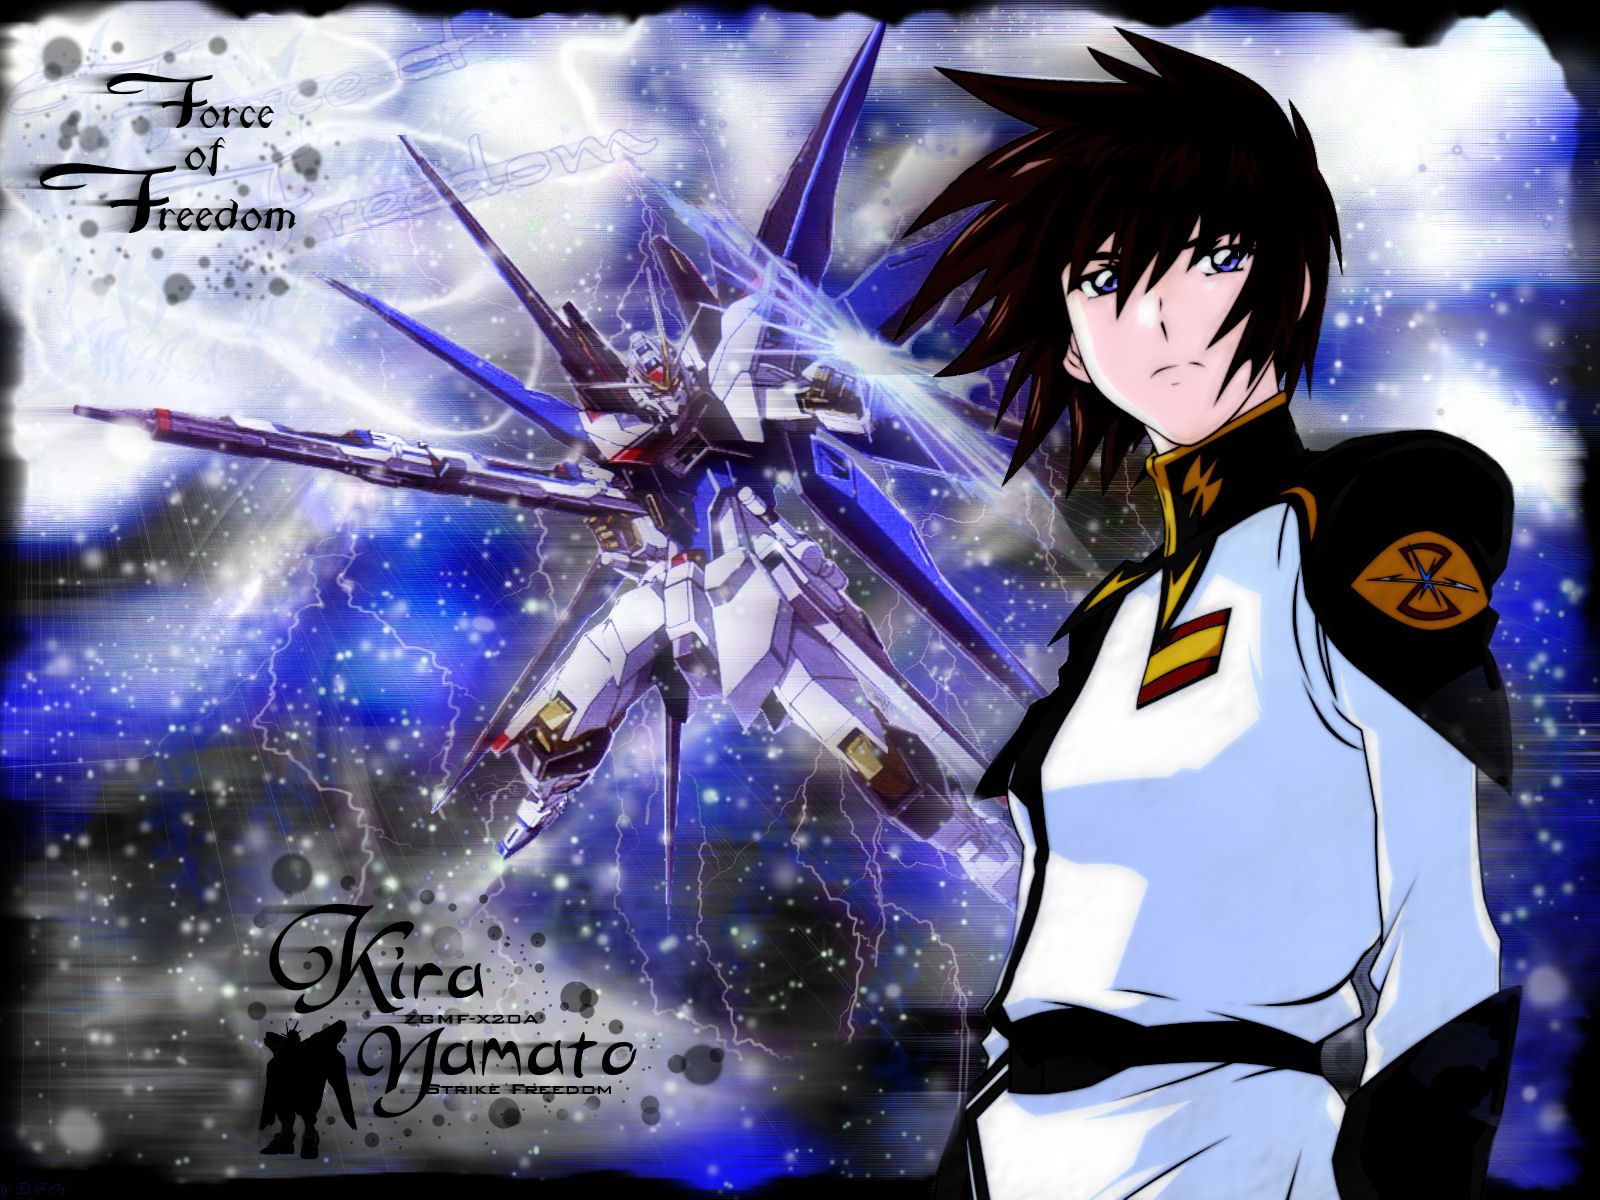 Mobile Suit Gundam SEED Destiny Wallpaper: '=Force of Freedom='